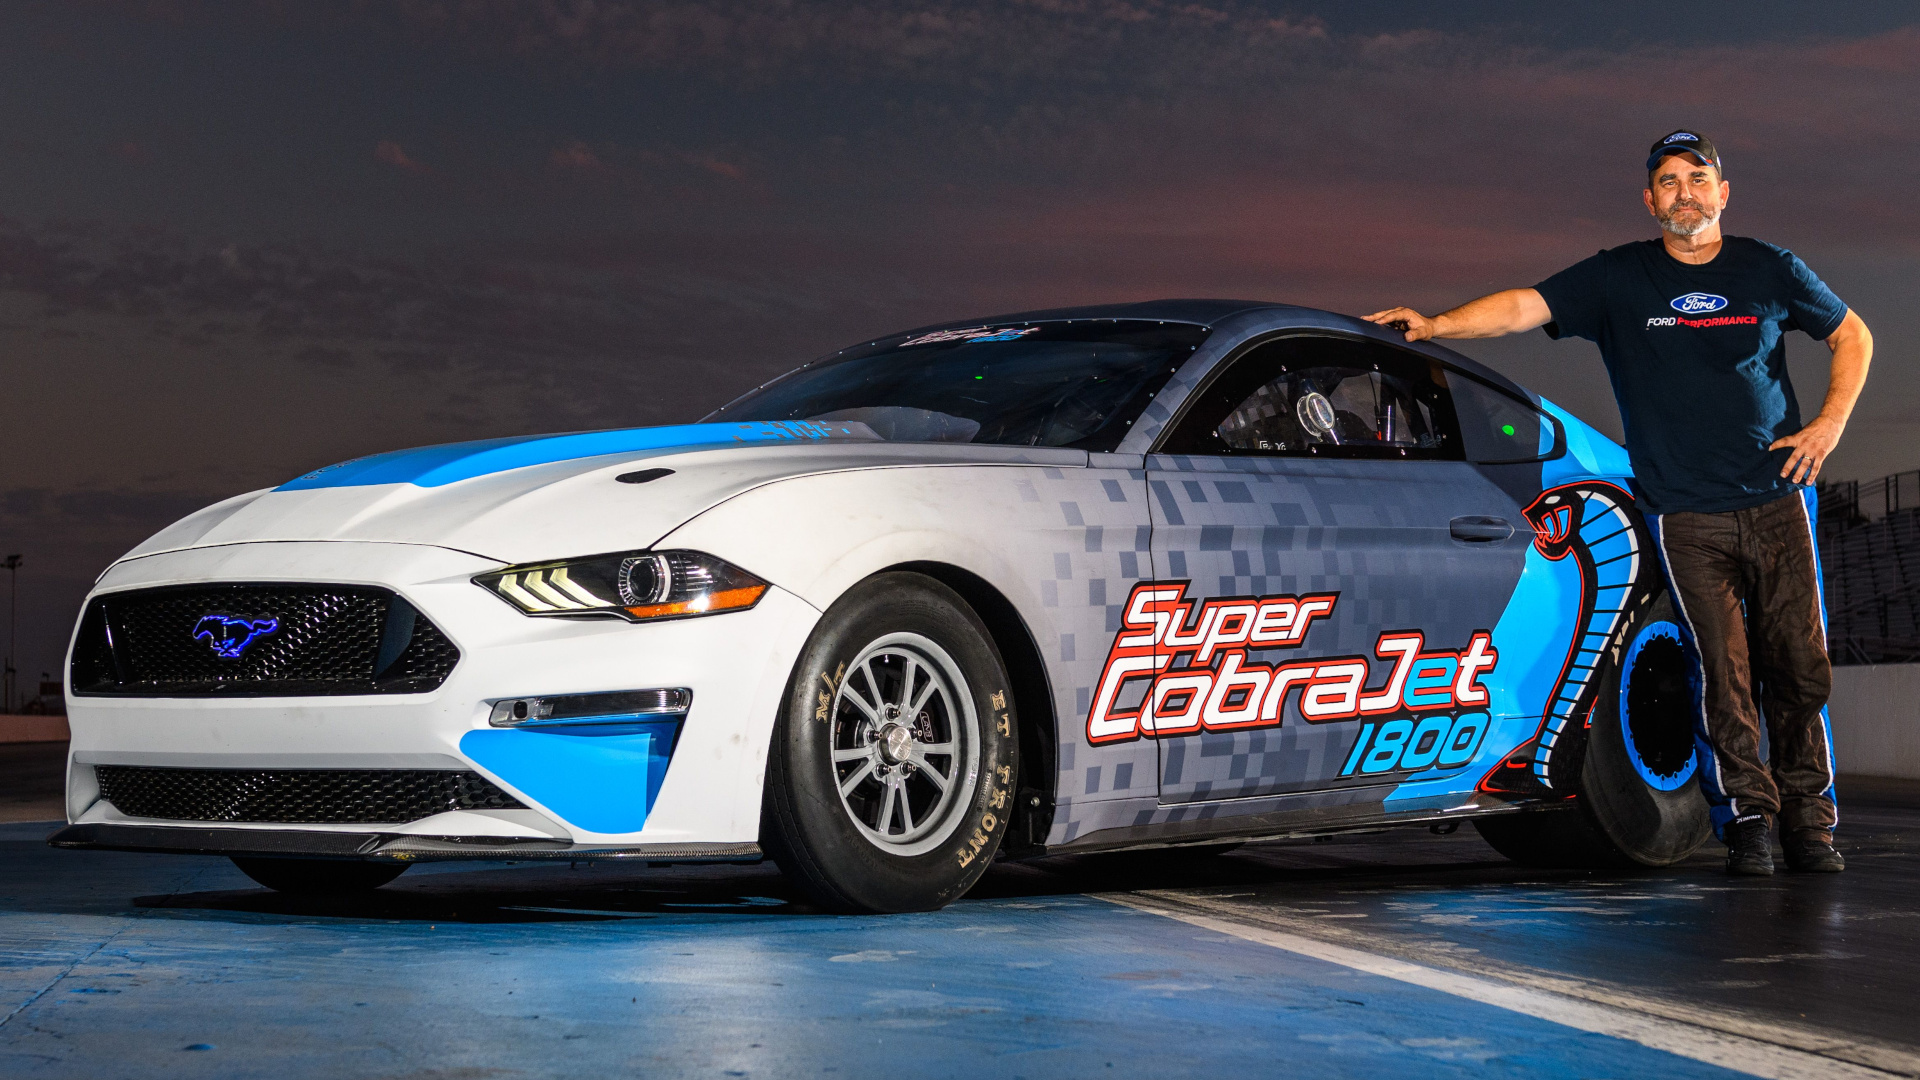 Ford Aims To Break NHRA EV World Record With 1,800-HP Mustang Super Cobra Jet